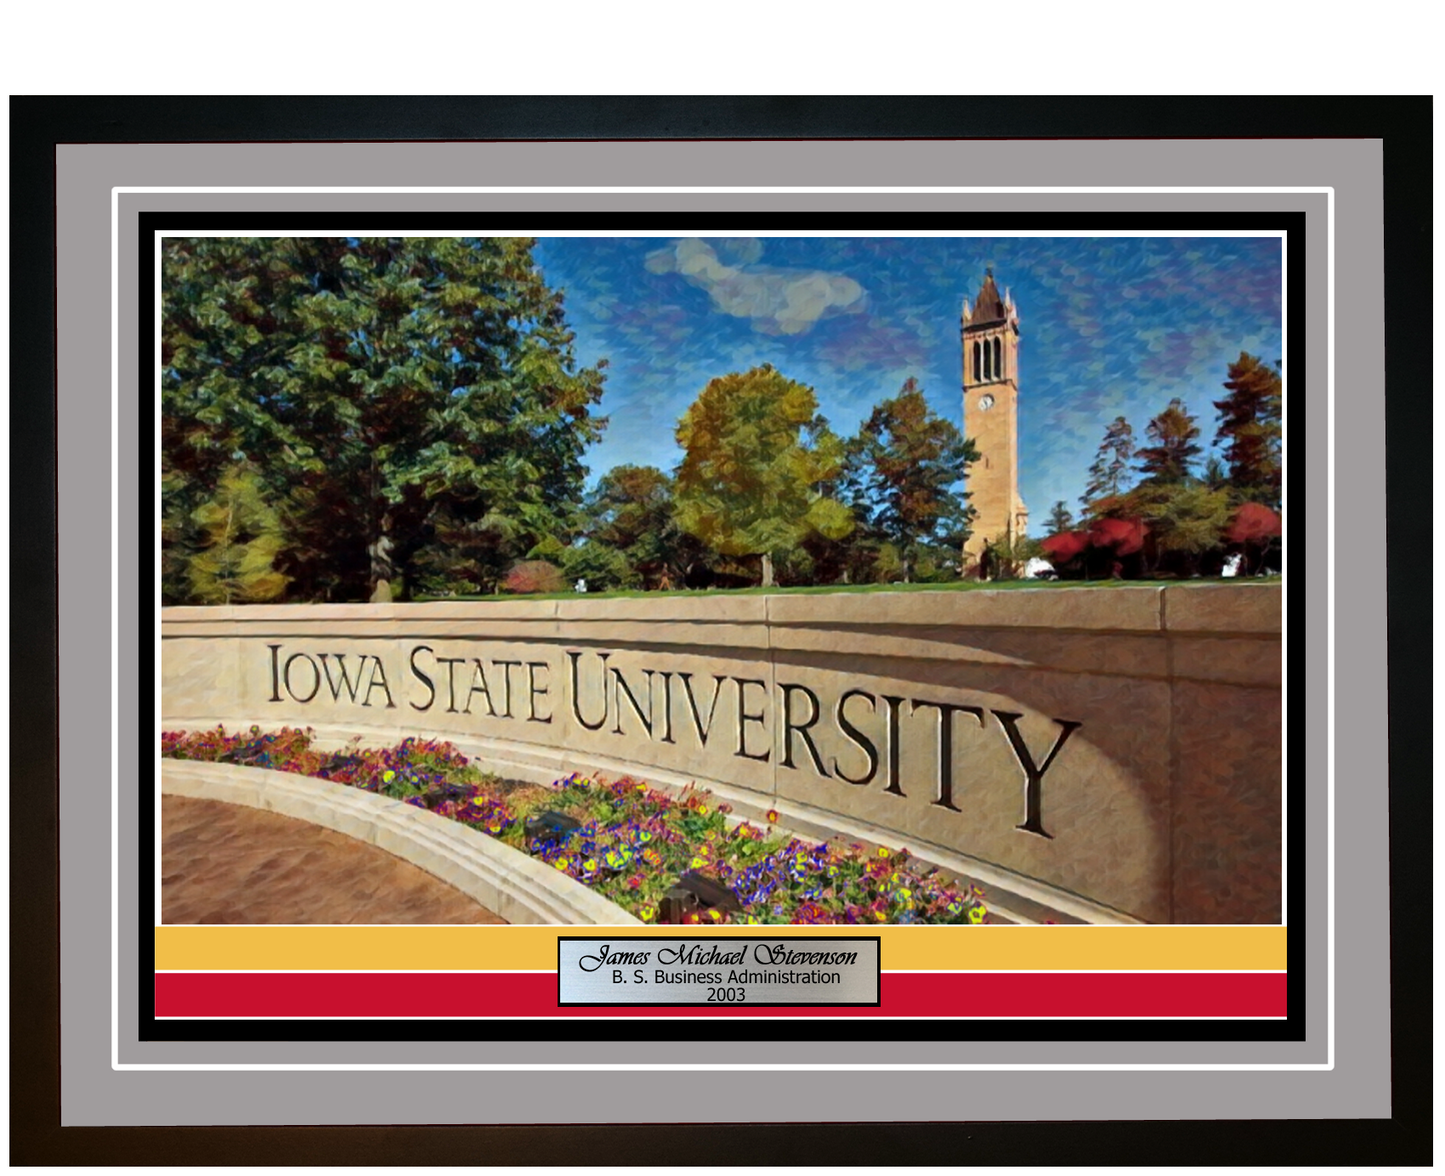 Iowa State University Framed and Engraved Art Print